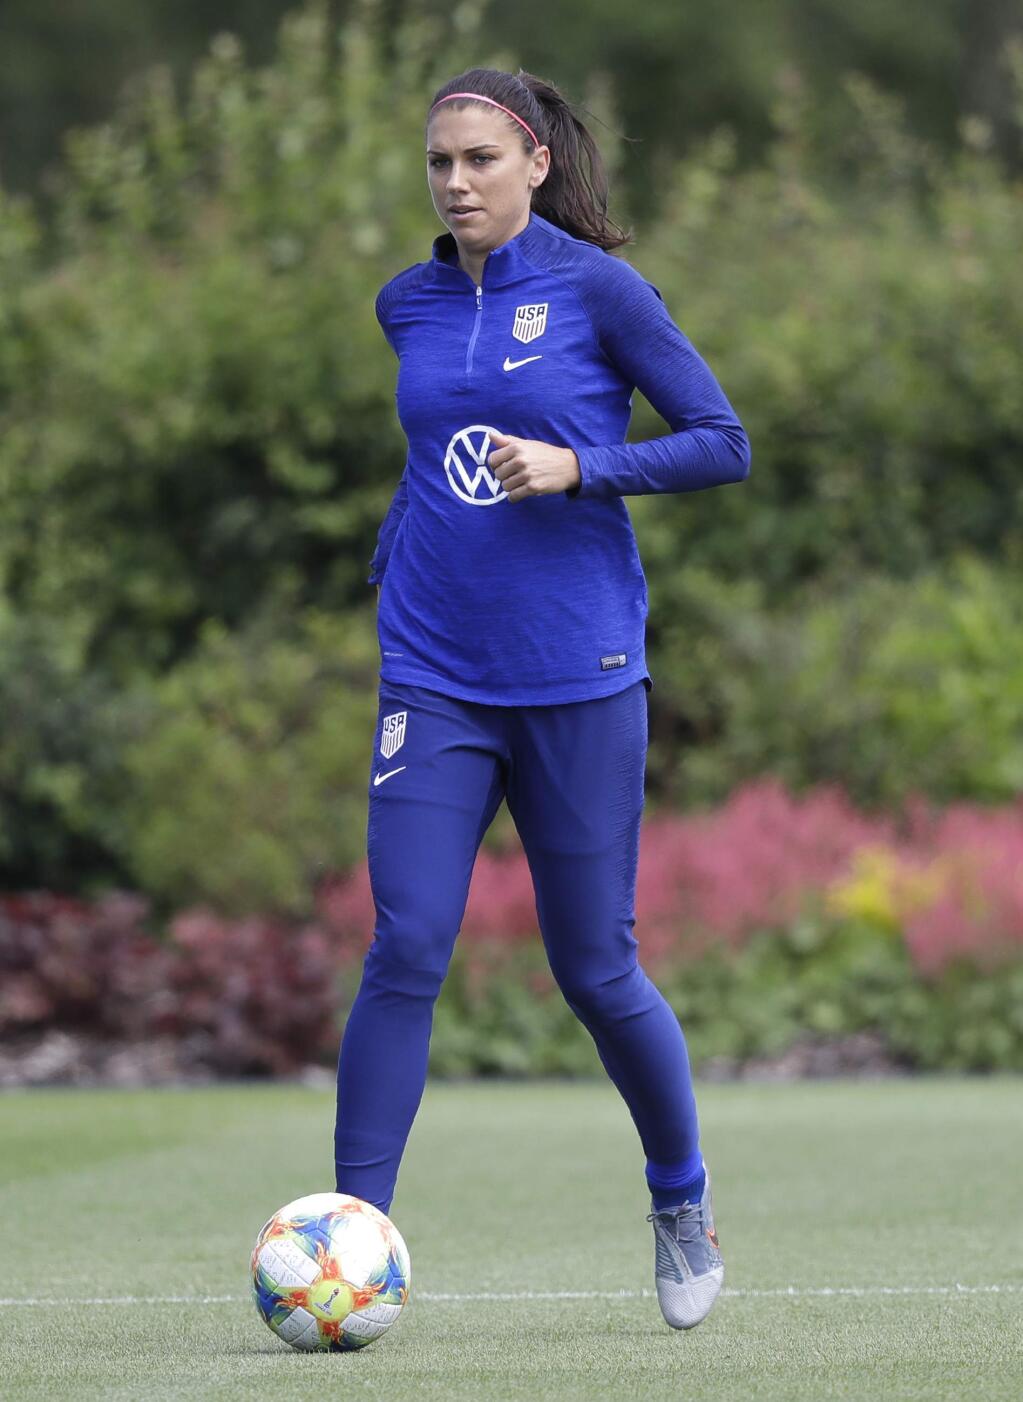 US player Alex Morgan during a US womens soccer team training session at the Tottenham Hotspur training centre in London, Thursday, June 6, 2019. The Women's World Cup starts in France on June 7. (AP Photo/Kirsty Wigglesworth)